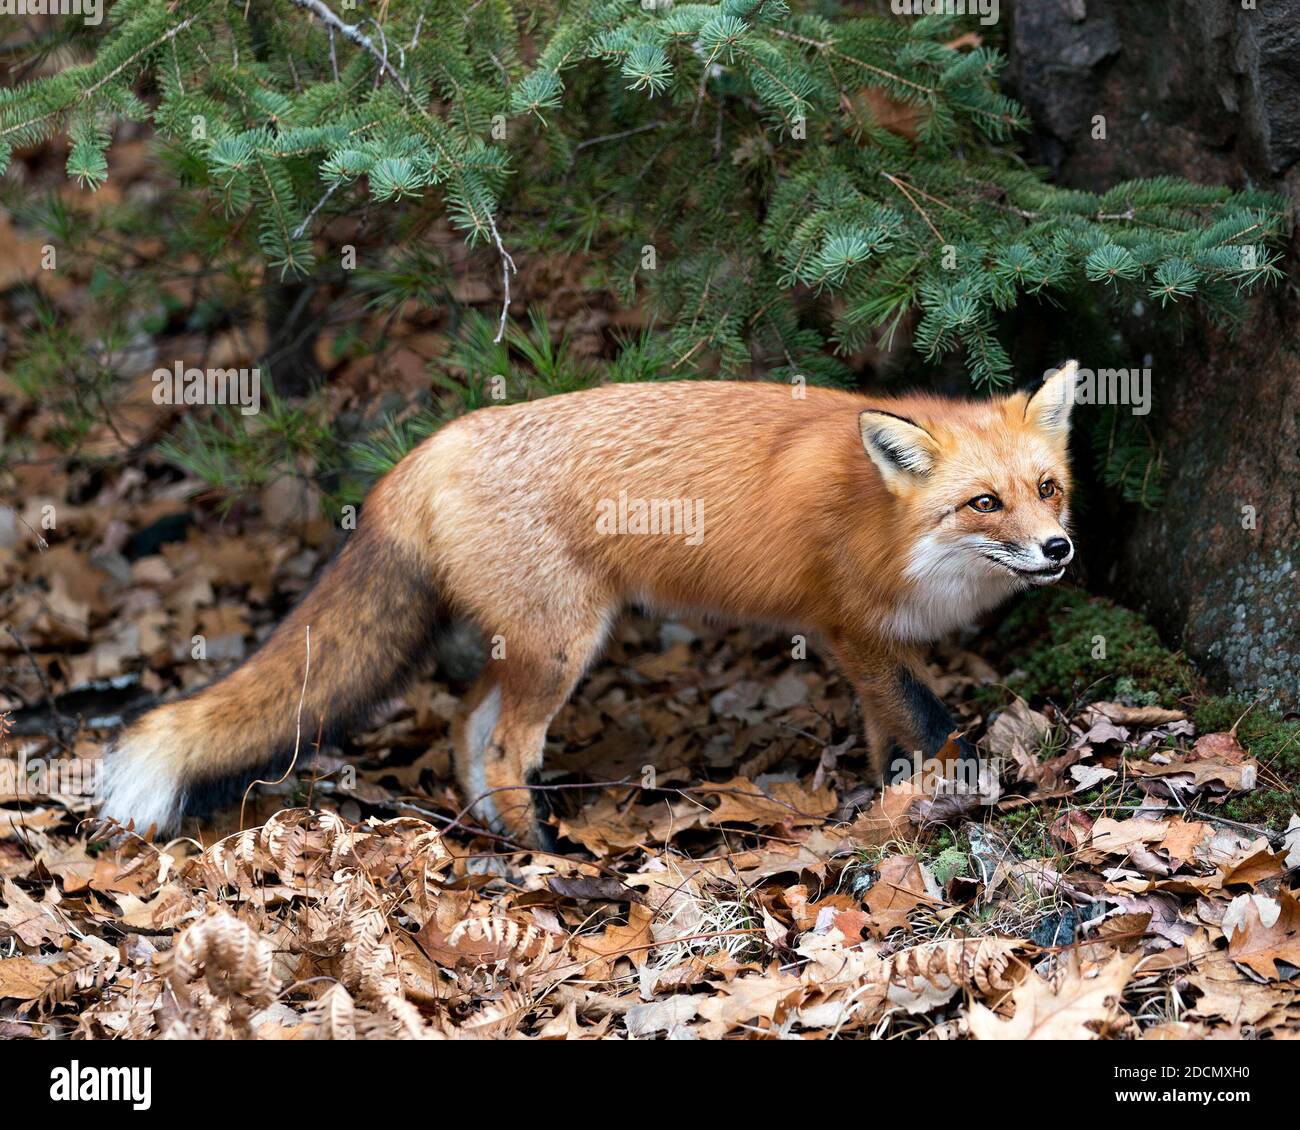 Red fox close-up profile view with spruce tree needles background, moss and autumn brown leaves in its environment and habitat displaying fox tail, Stock Photo